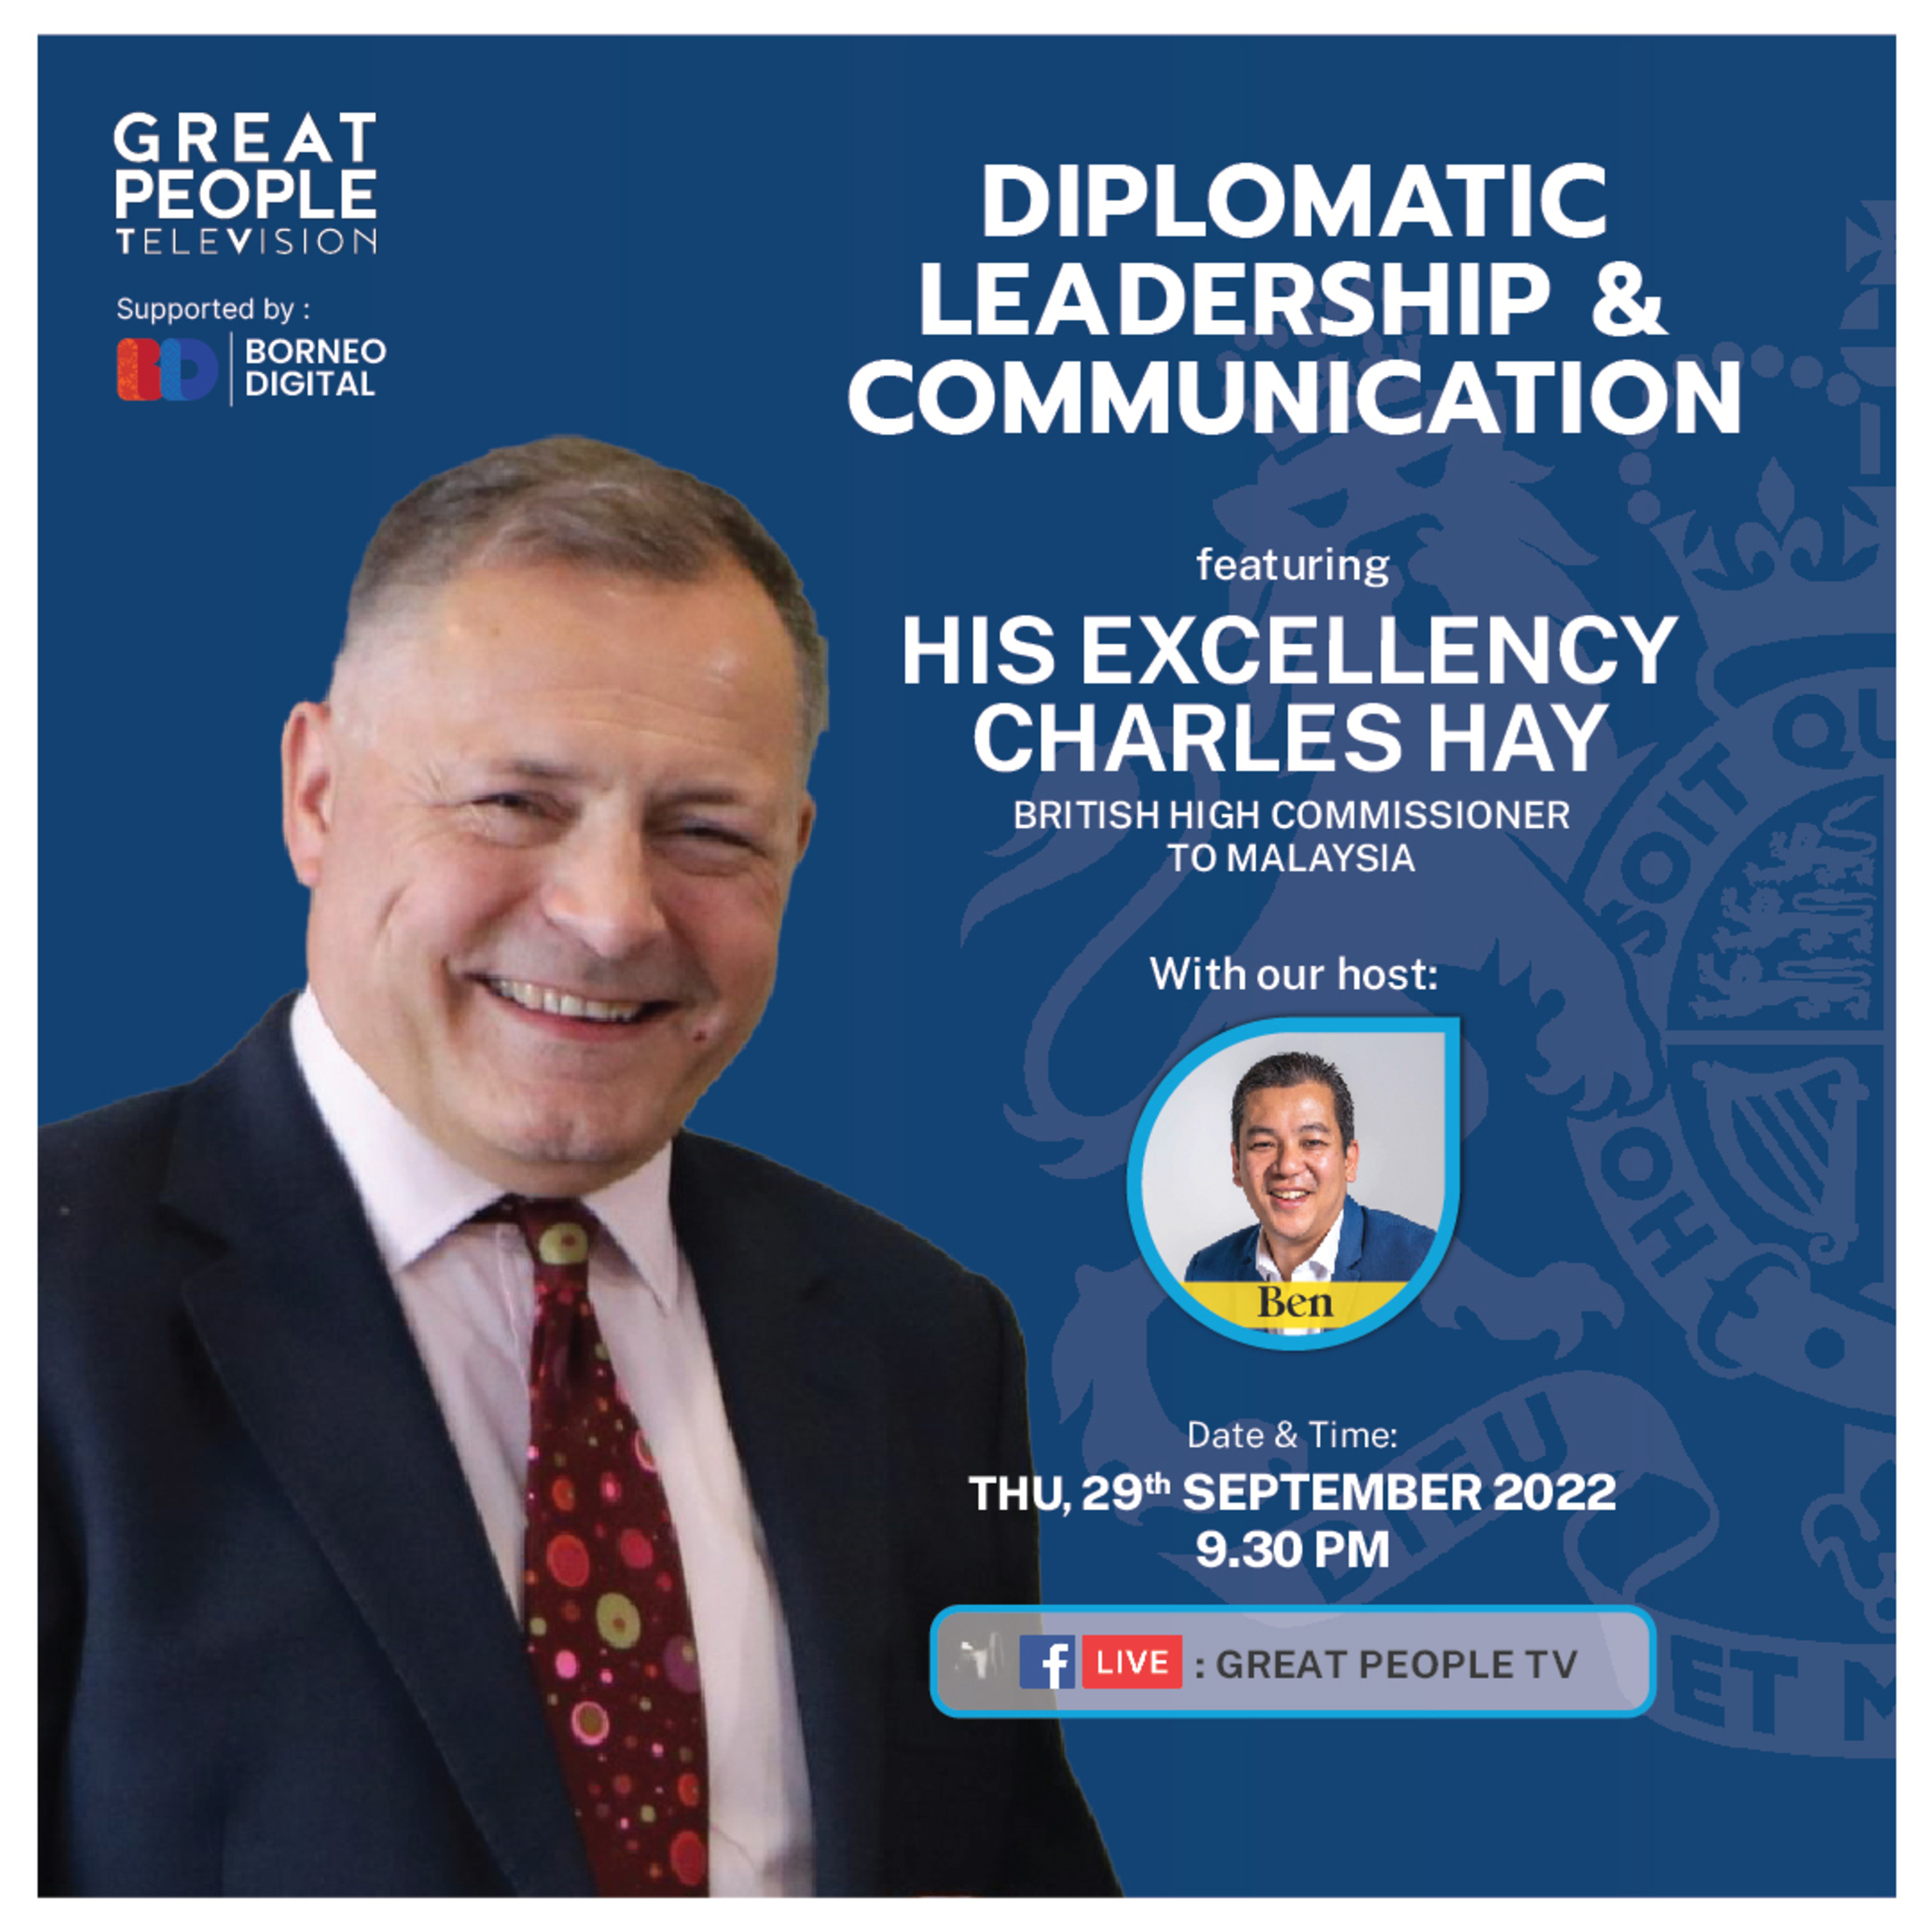 Diplomatic Leadership & Communication - His Excellency Charles Hay